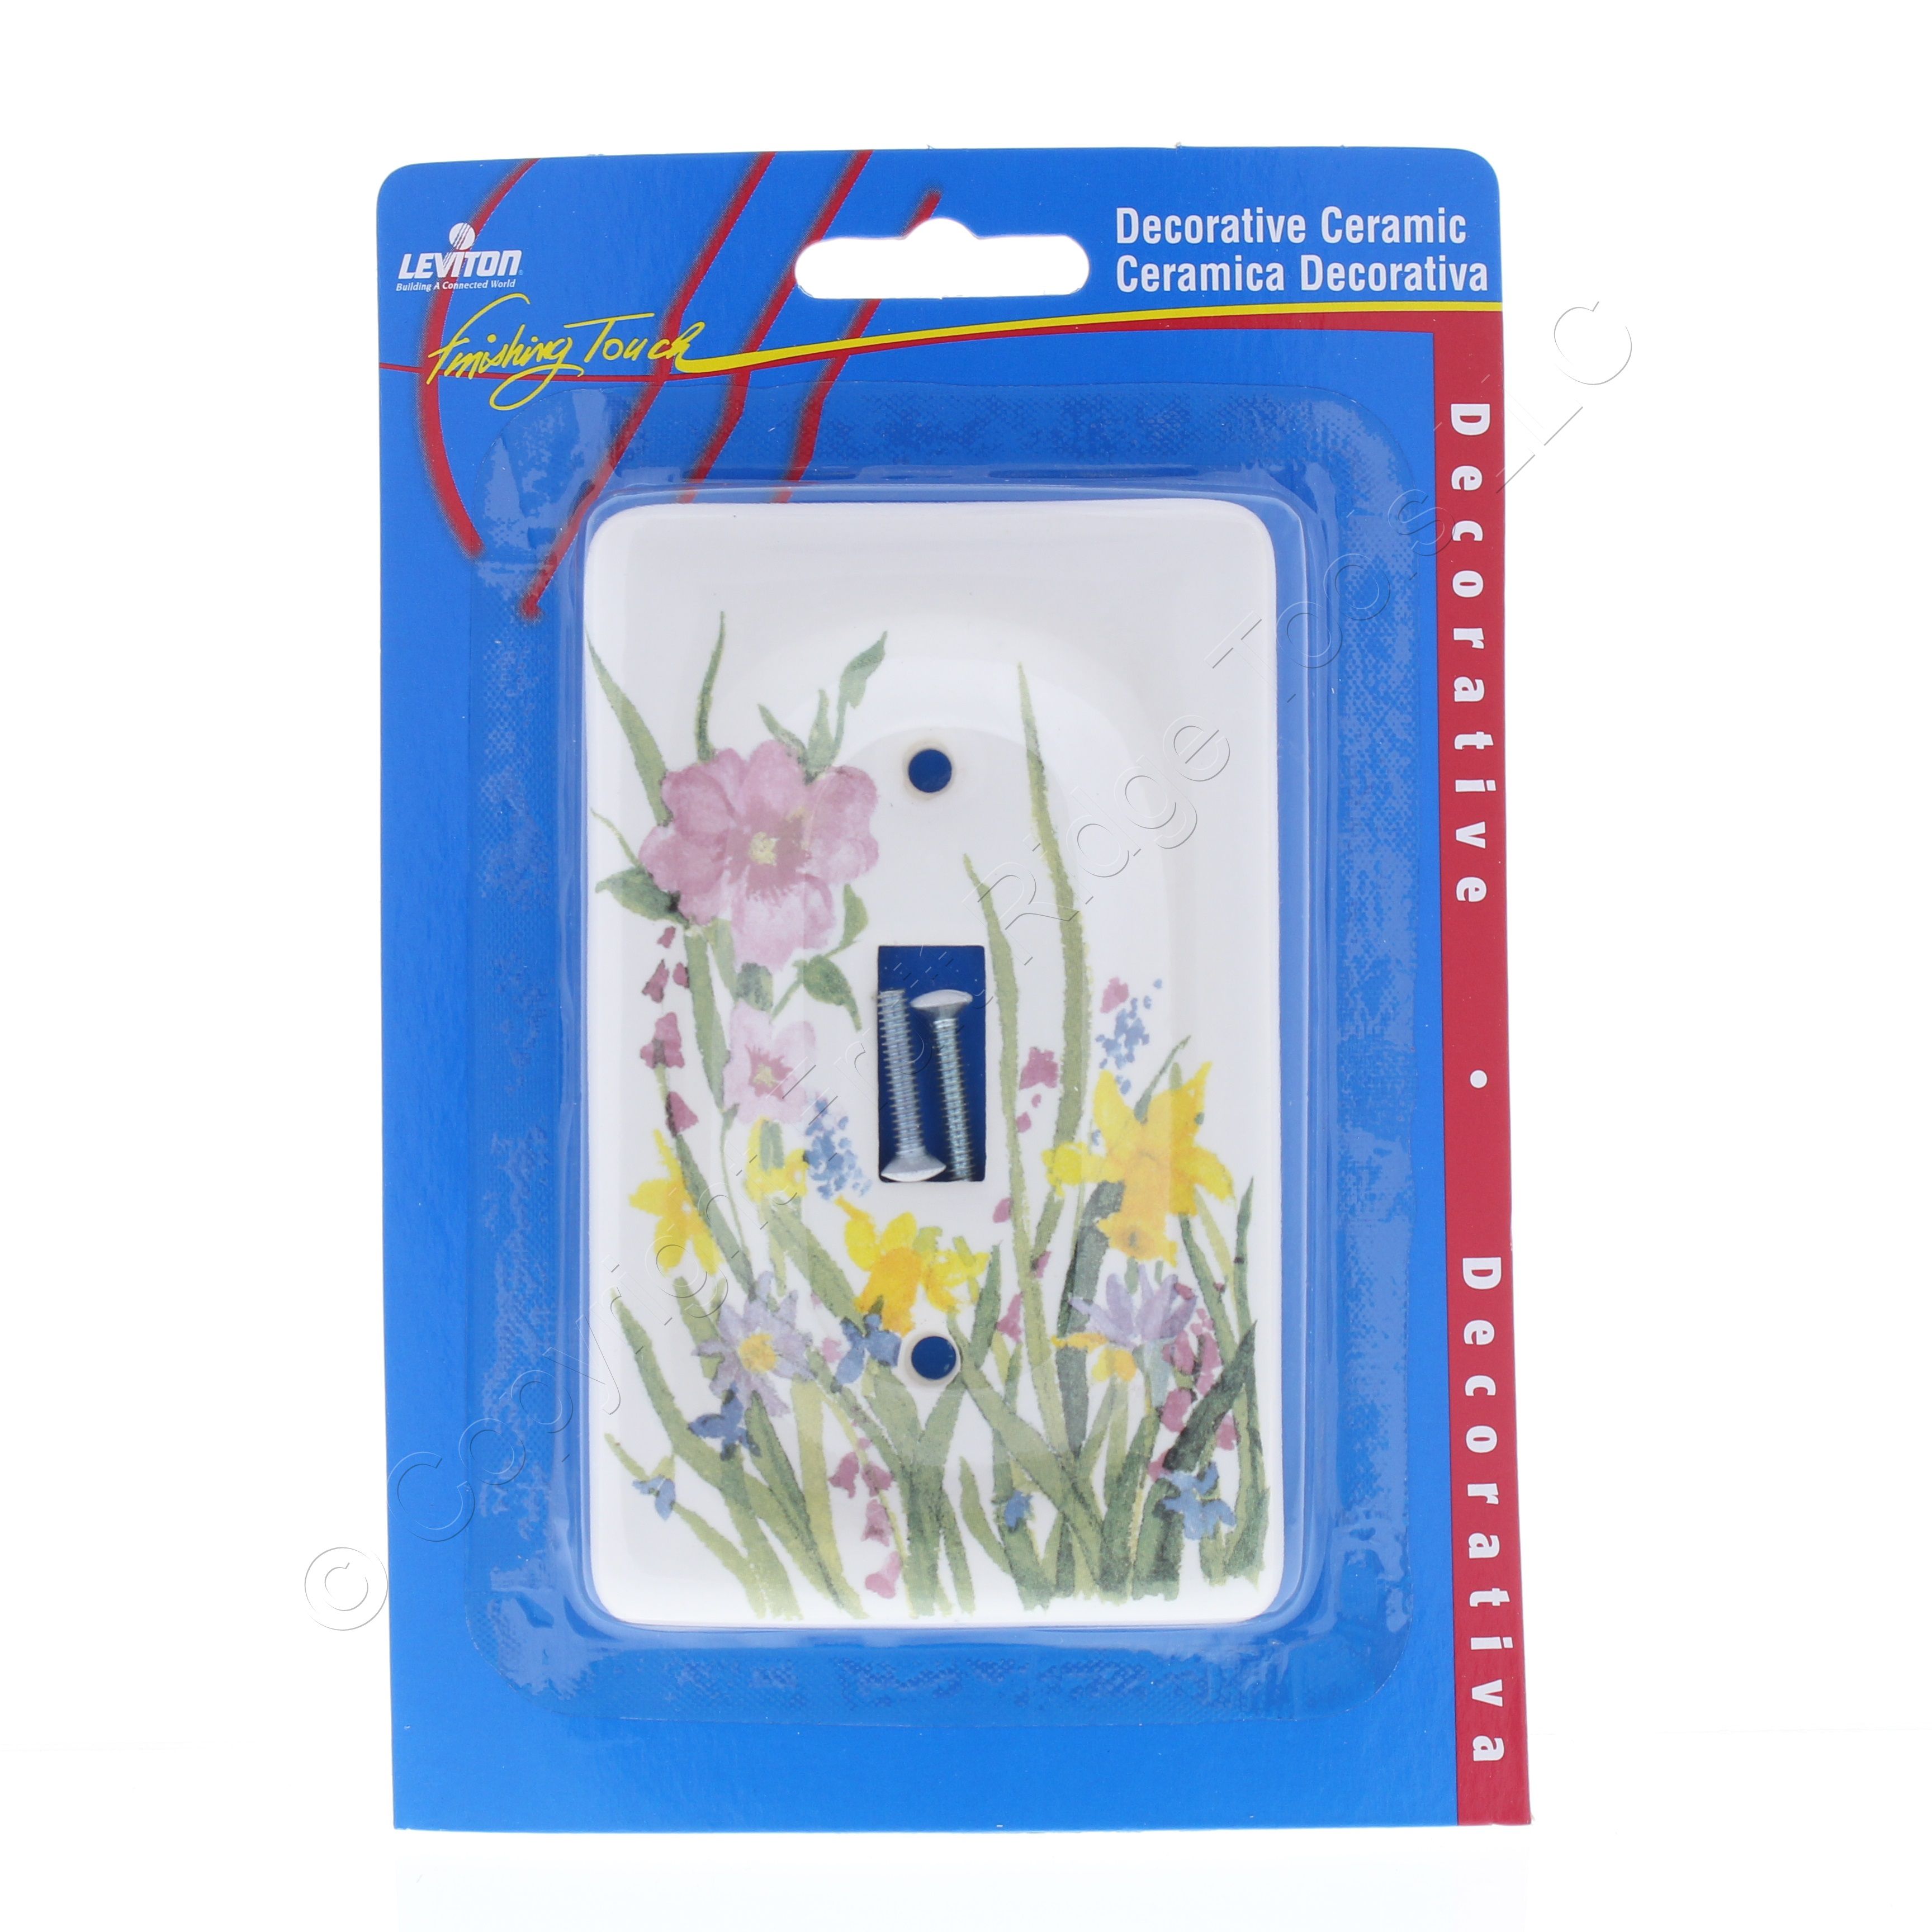 wildflower porcelain light switch cover